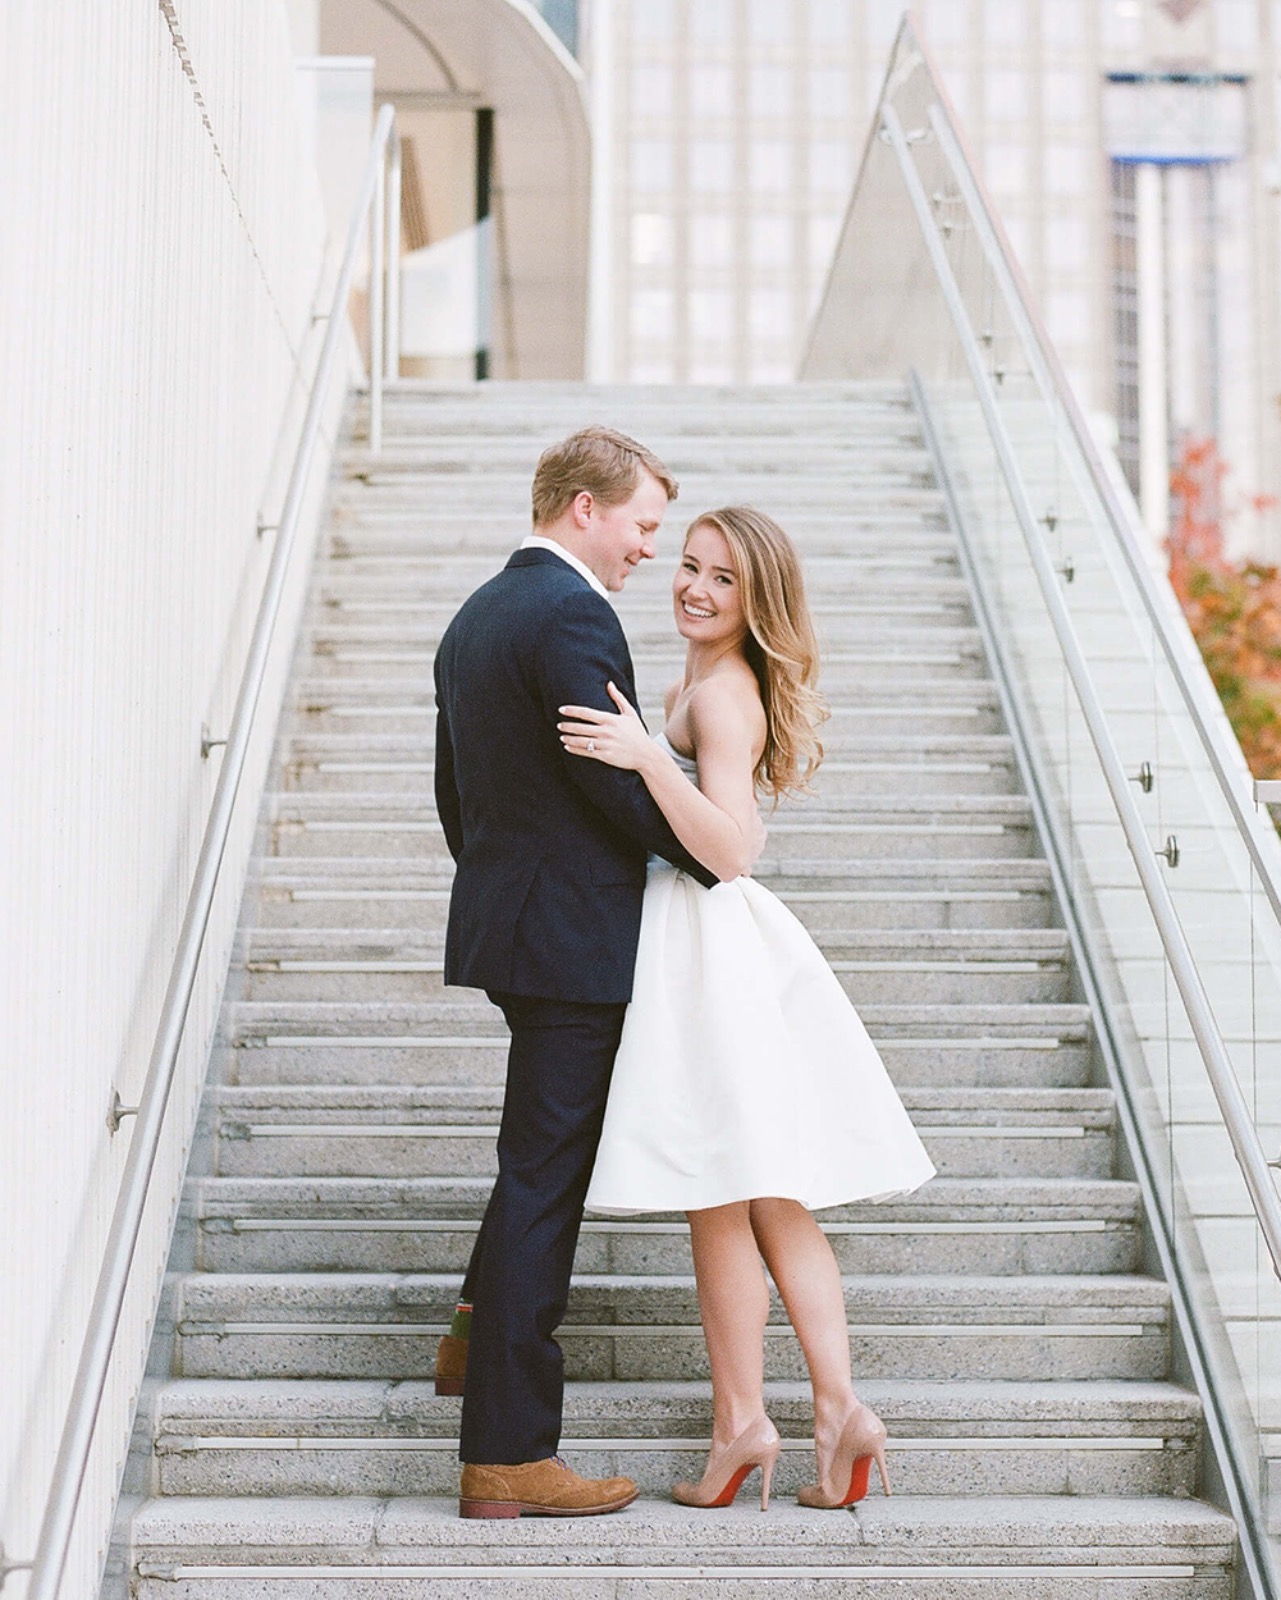 Downtown Engagement Portraits and a Playlist to Pair